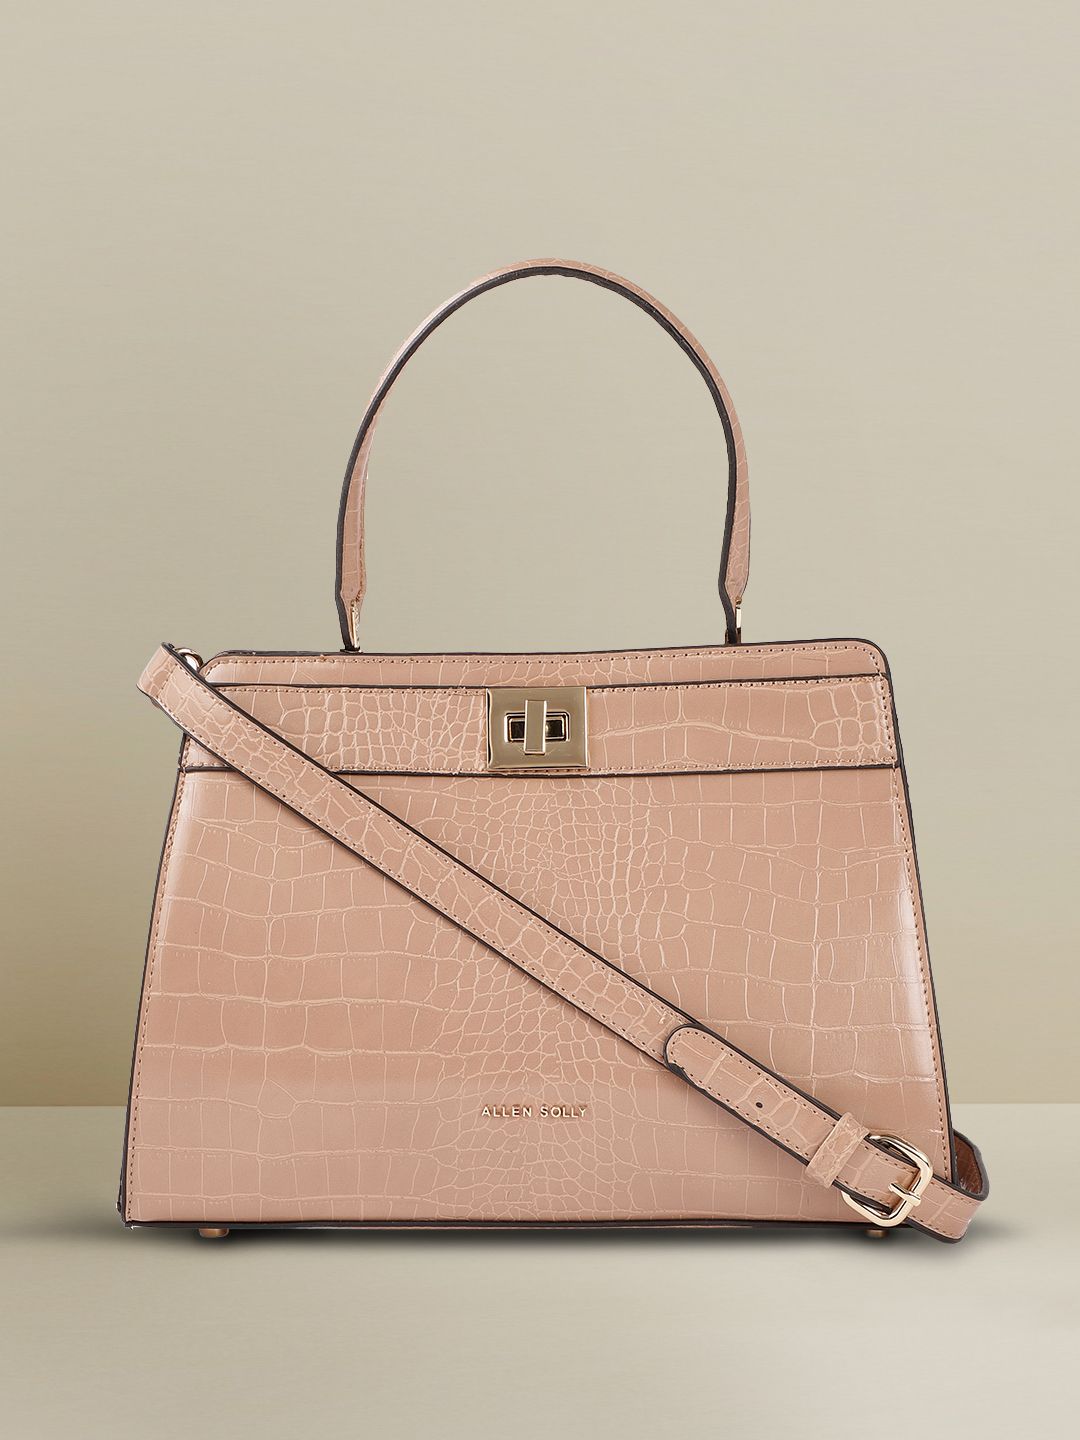 Allen Solly Dusty Pink Animal Textured Structured Handheld Bag Price in India